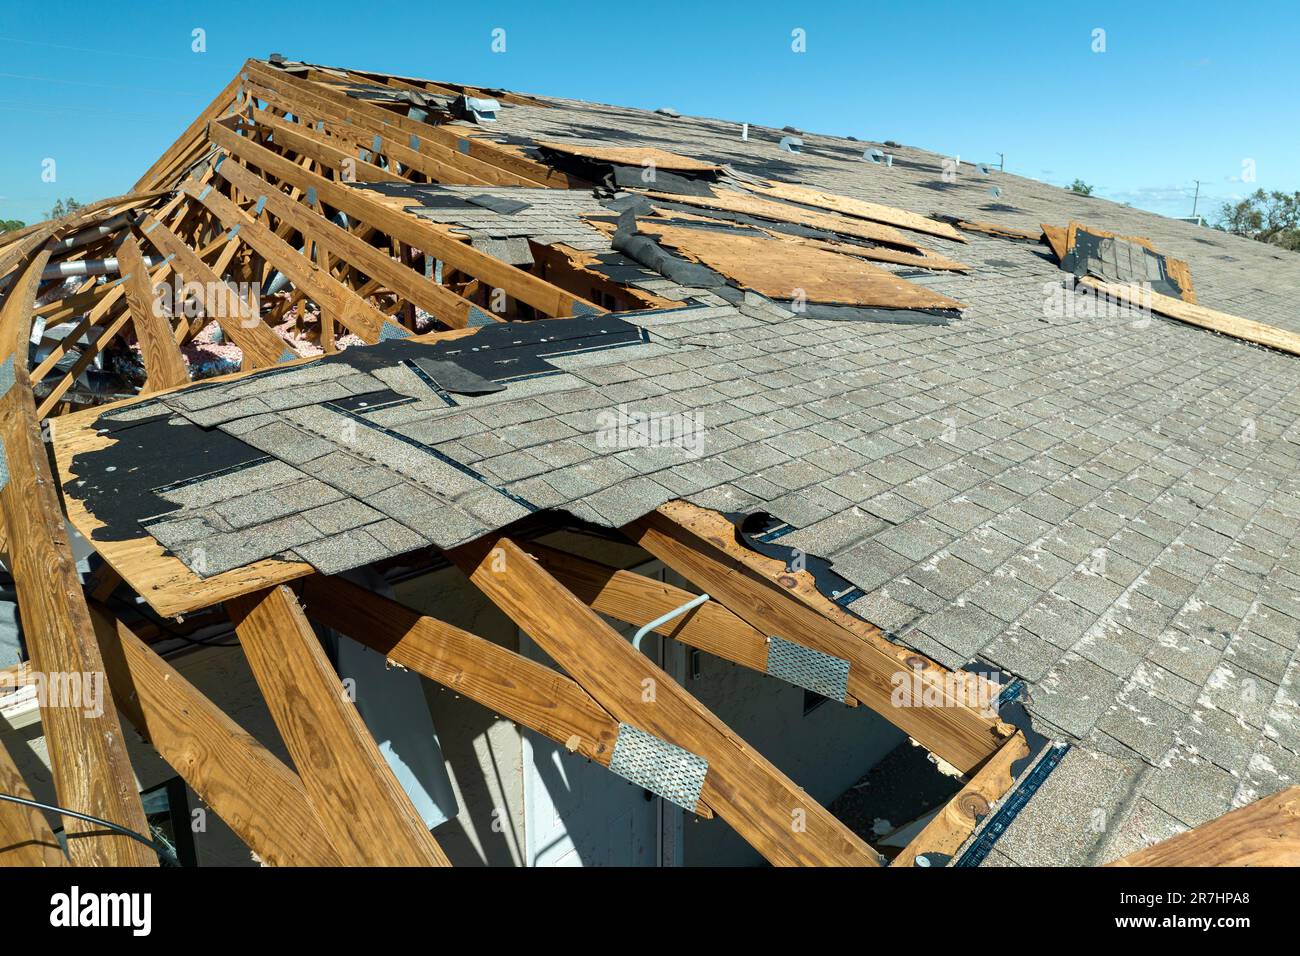 Natural disaster and its consequences. Hurricane Ian destroyed house roof in Florida residential area. Stock Photo